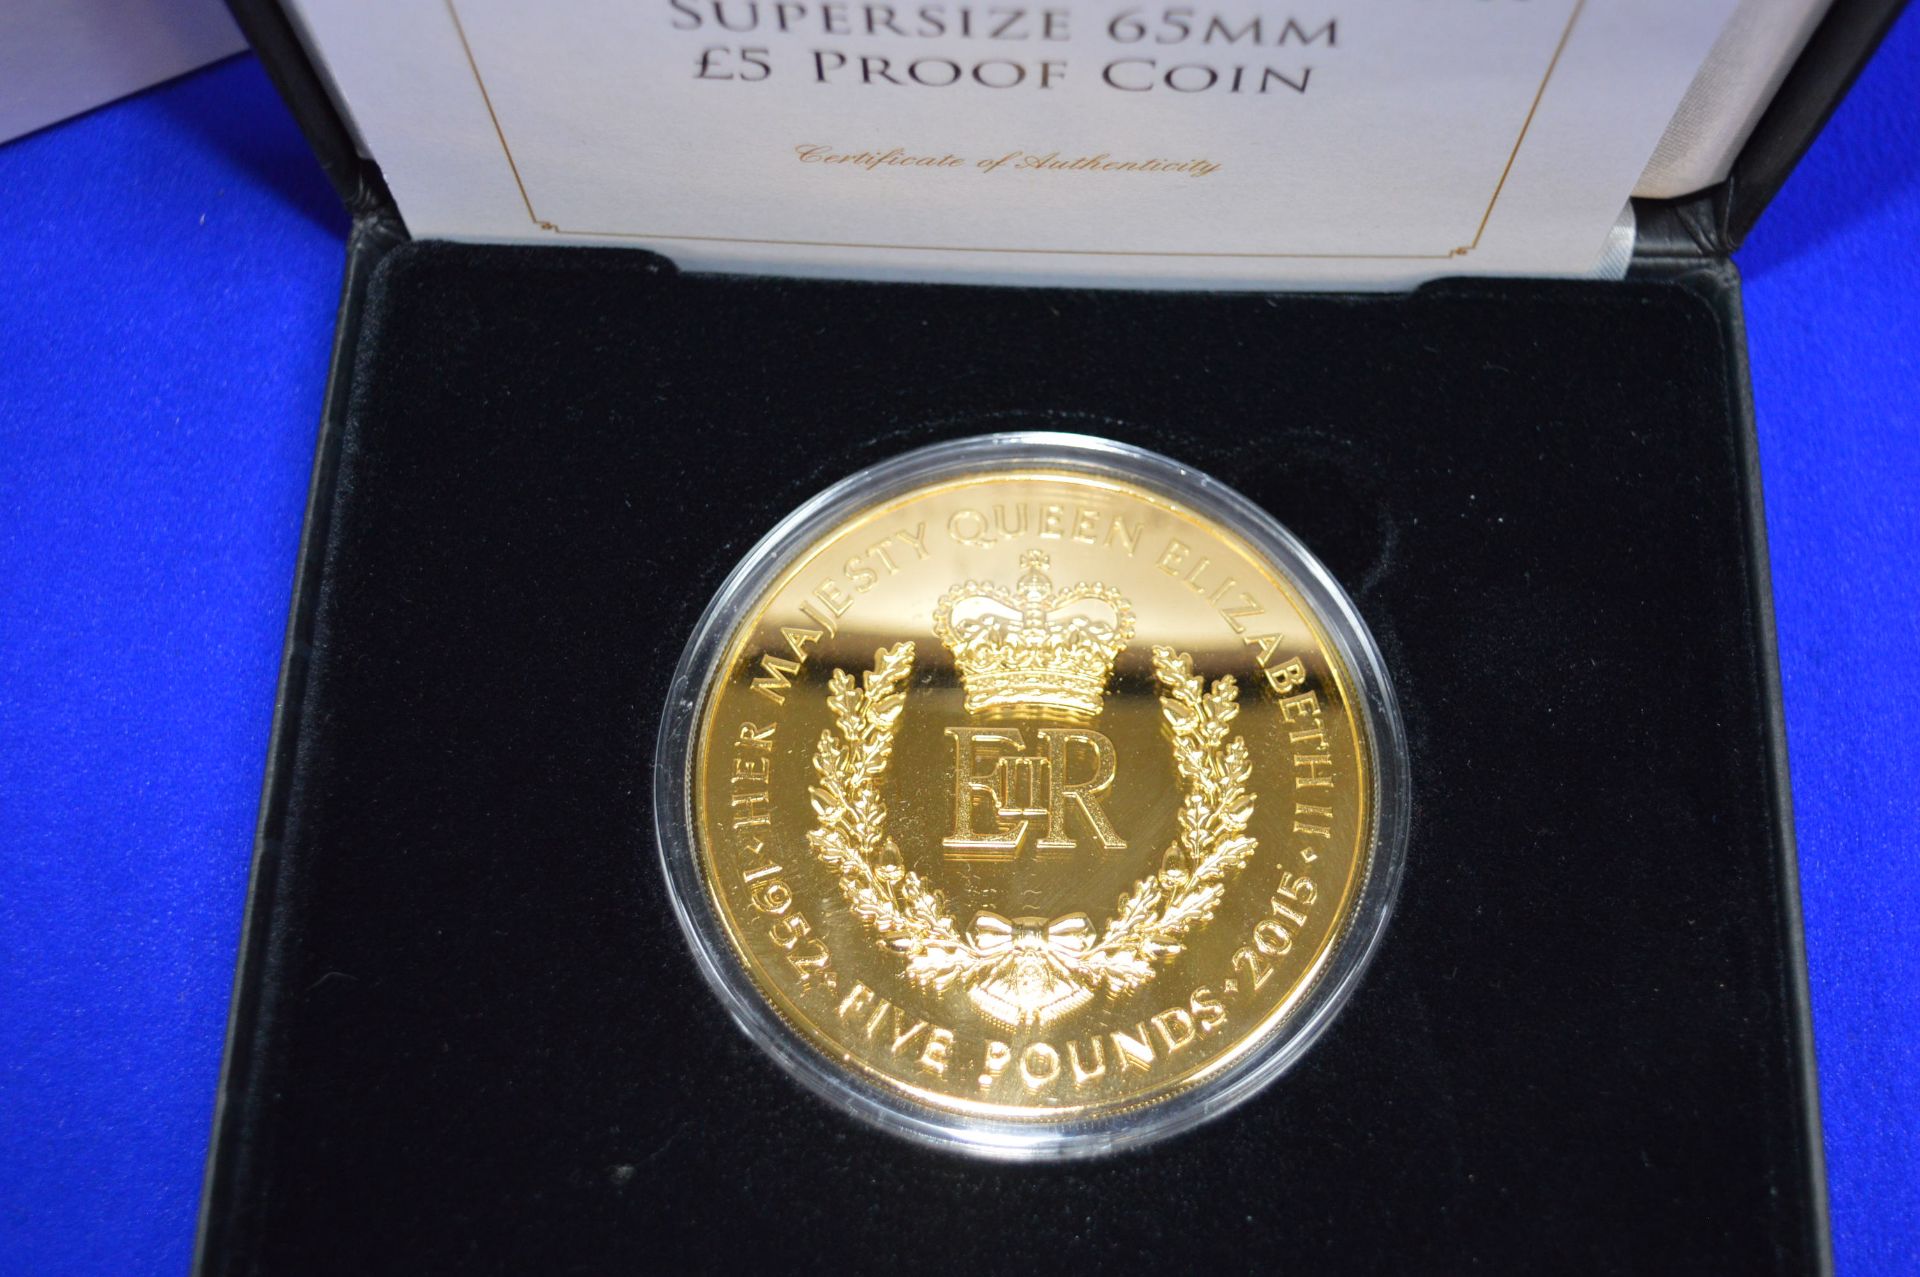 Queen Elizabeth Supersize £5 Proof Coin 24ct Gold Plated - Image 3 of 3